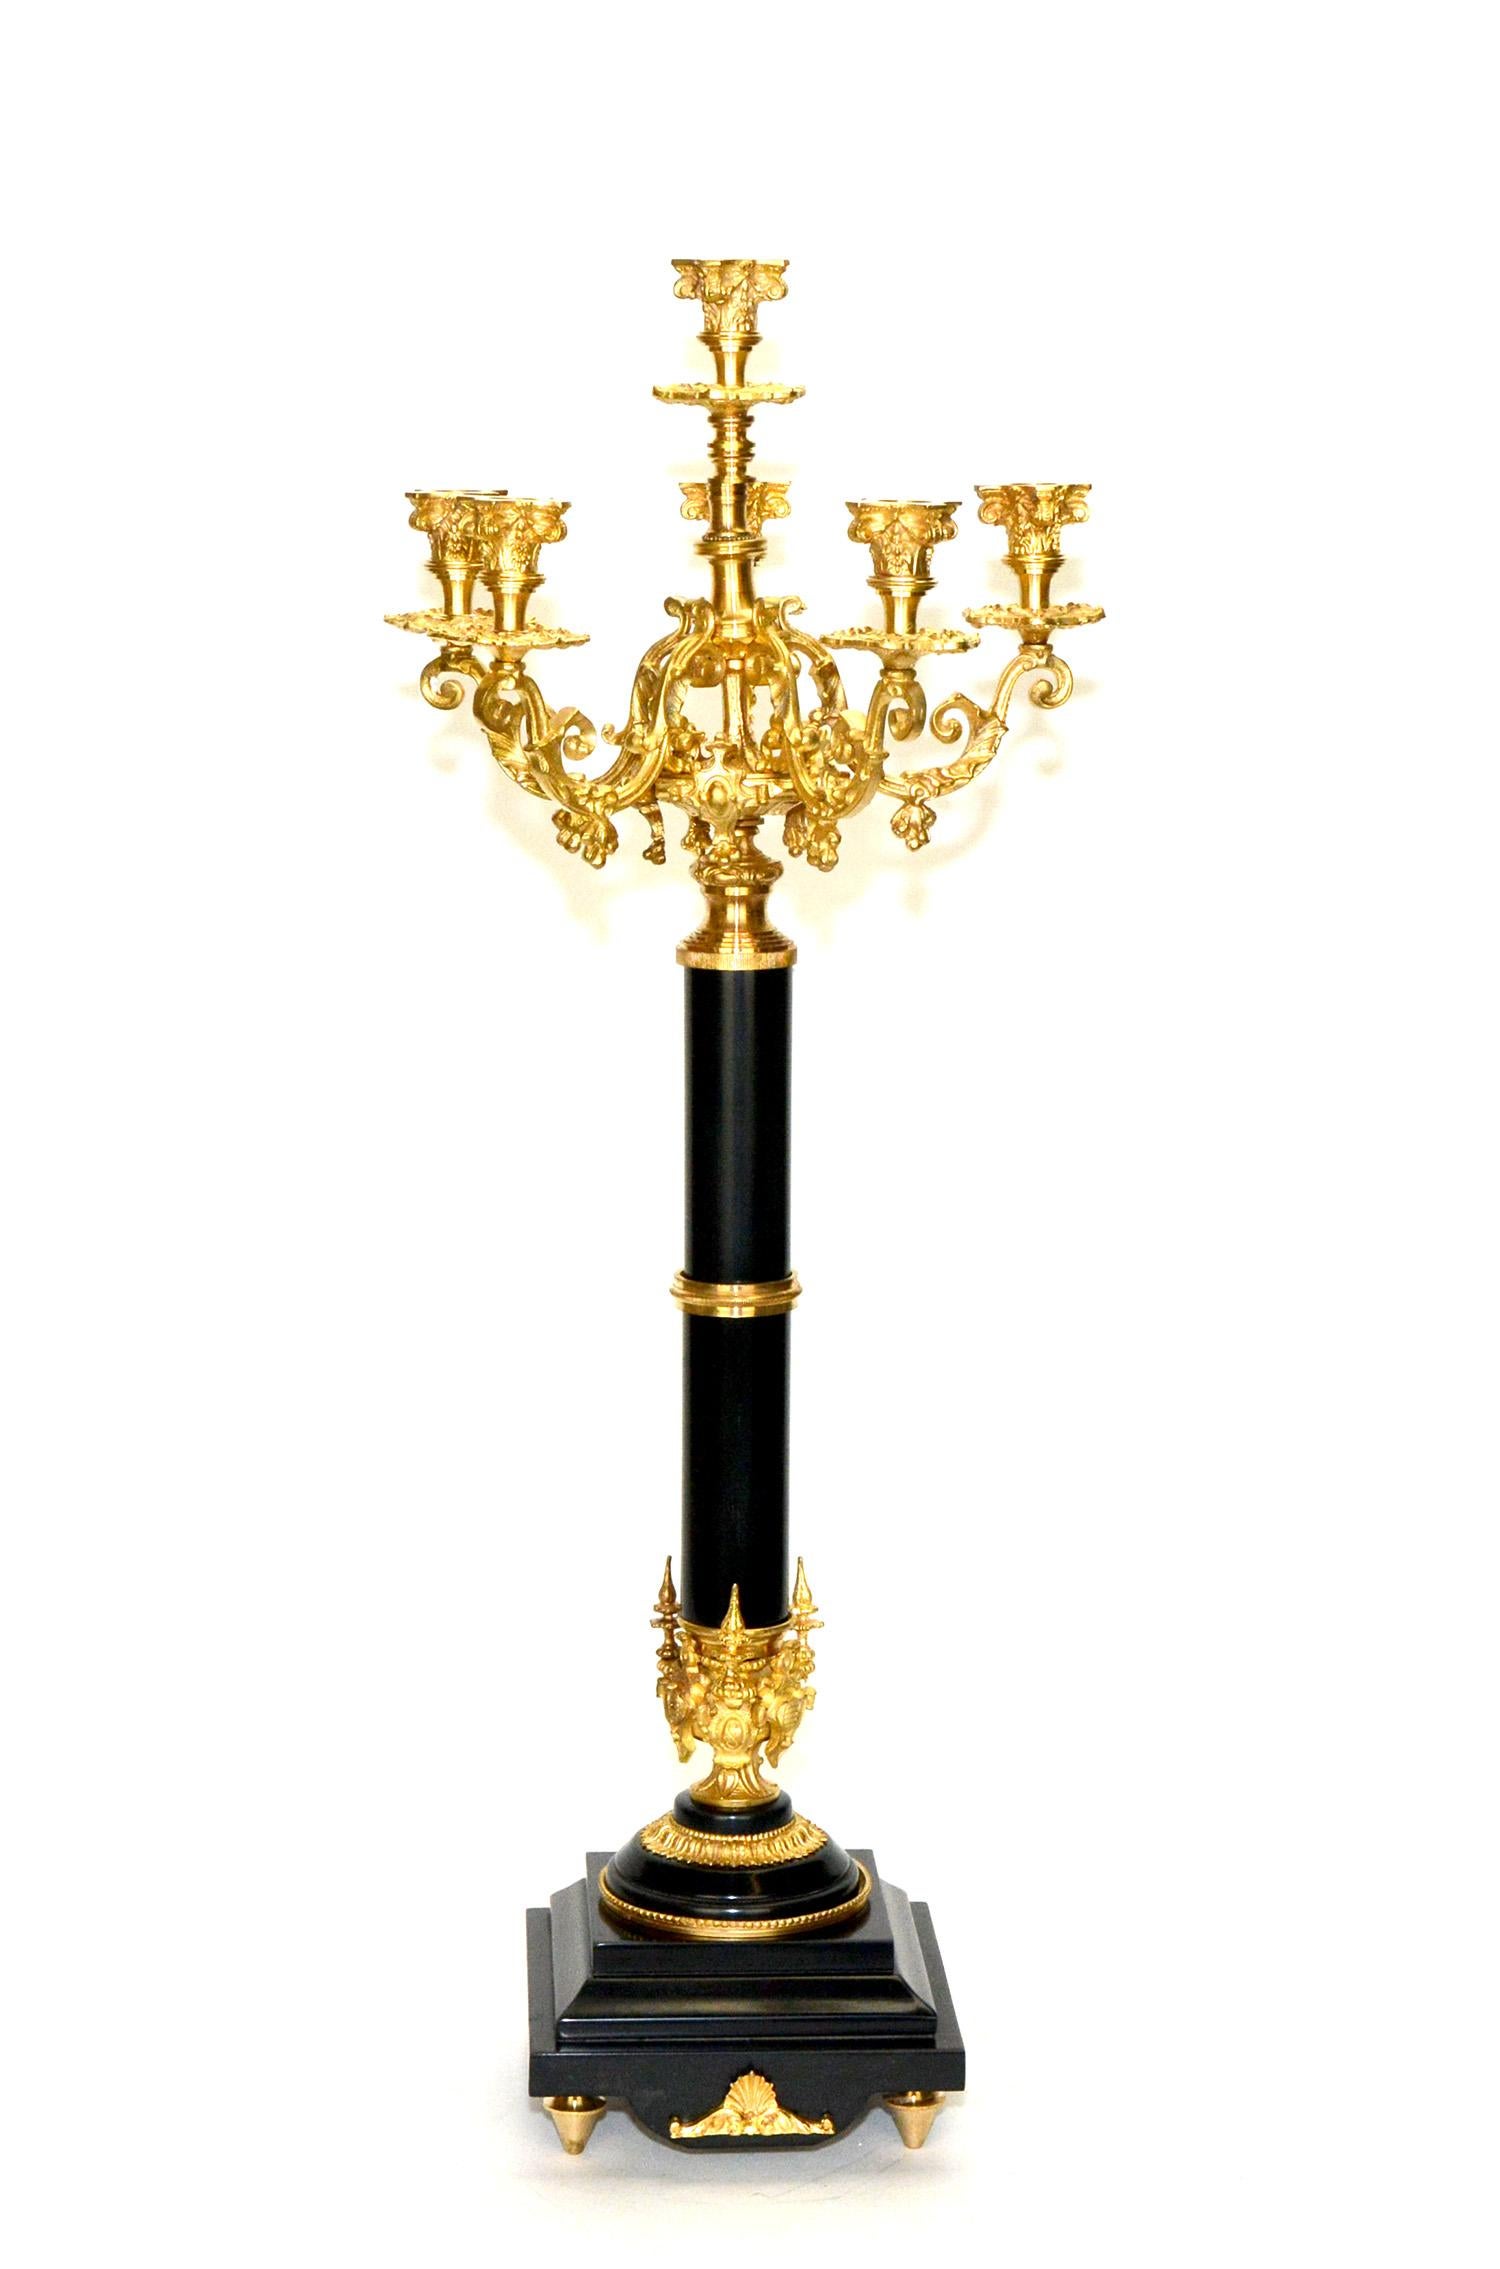 Pair of 6 Light Empire marble stand bronze candelabra

Here we are offering a pair of beautiful 6 light Empire marble Stand bronze candelabras. It's made of solid bronze with black marble Stand base. It holds up to 6 candles. Below it's a detail